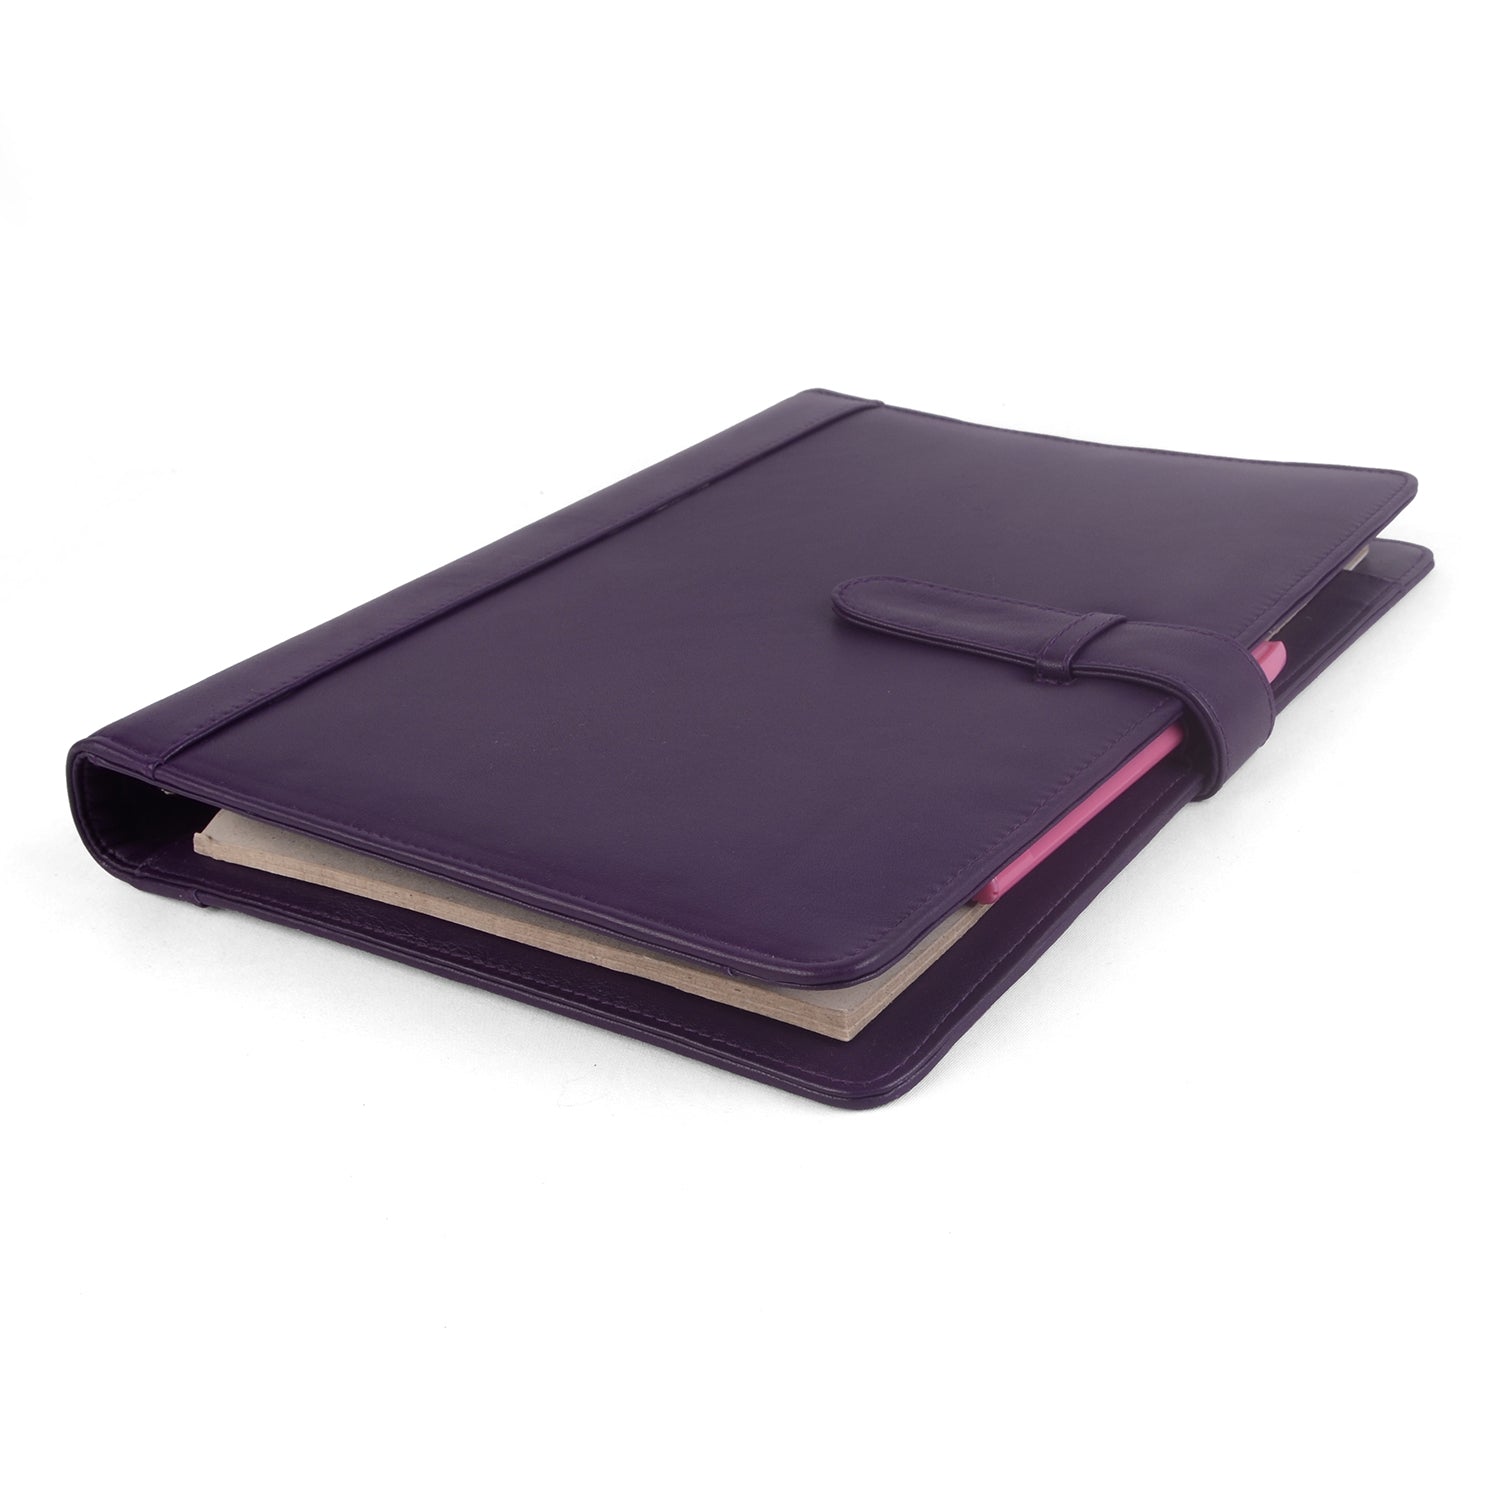 MAISON- A4 & USA Letter Leather Ring Binder Organizer